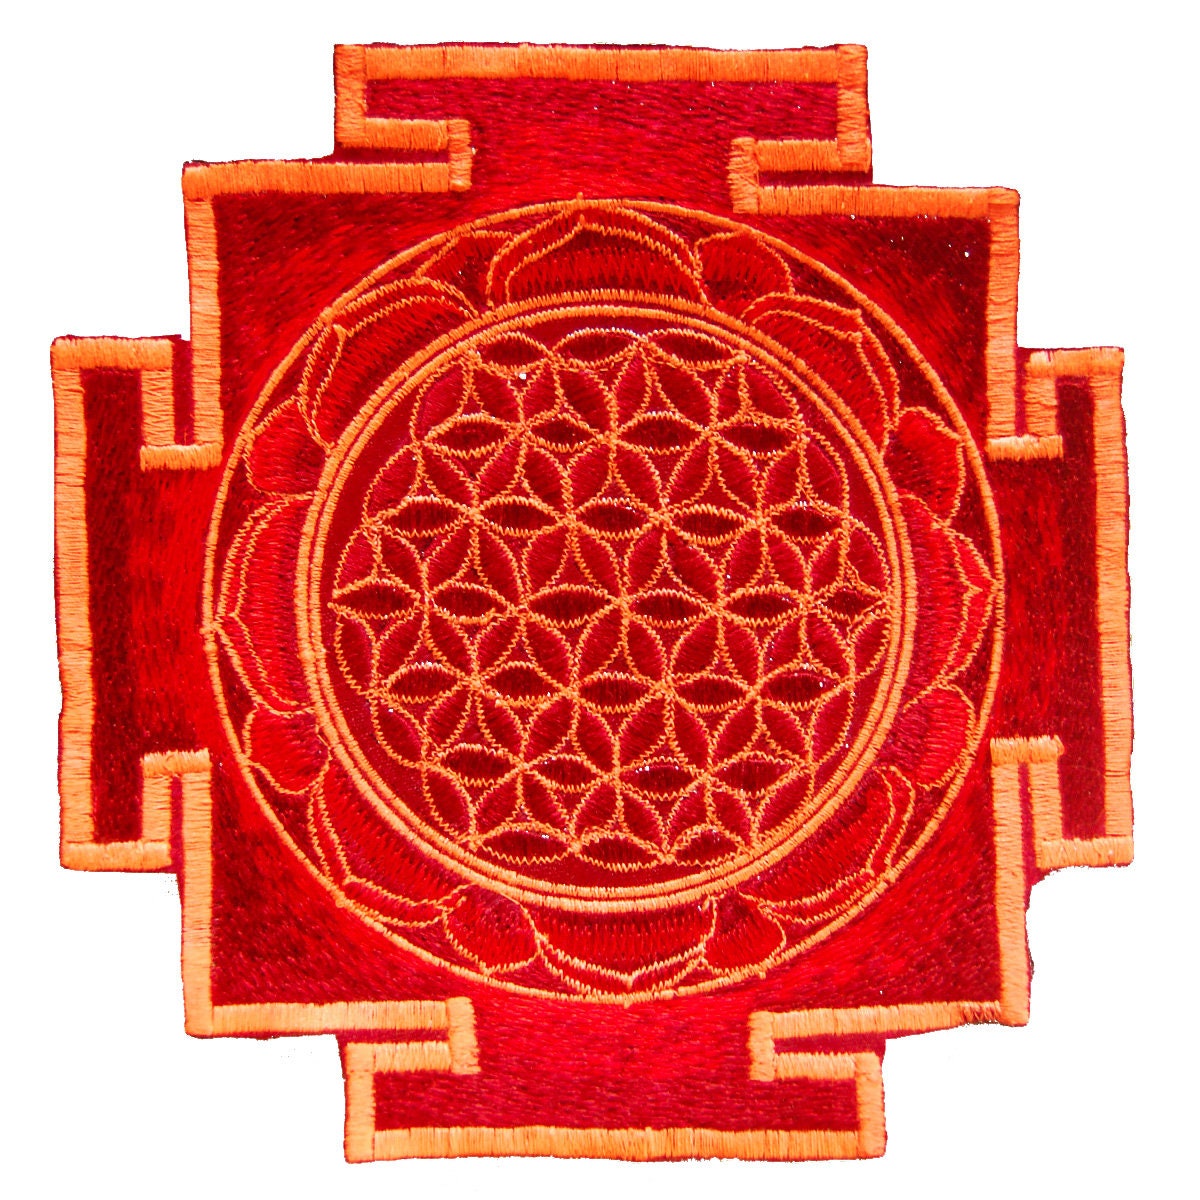 Green flower of life yantra sacred geometry patch holy healing information art